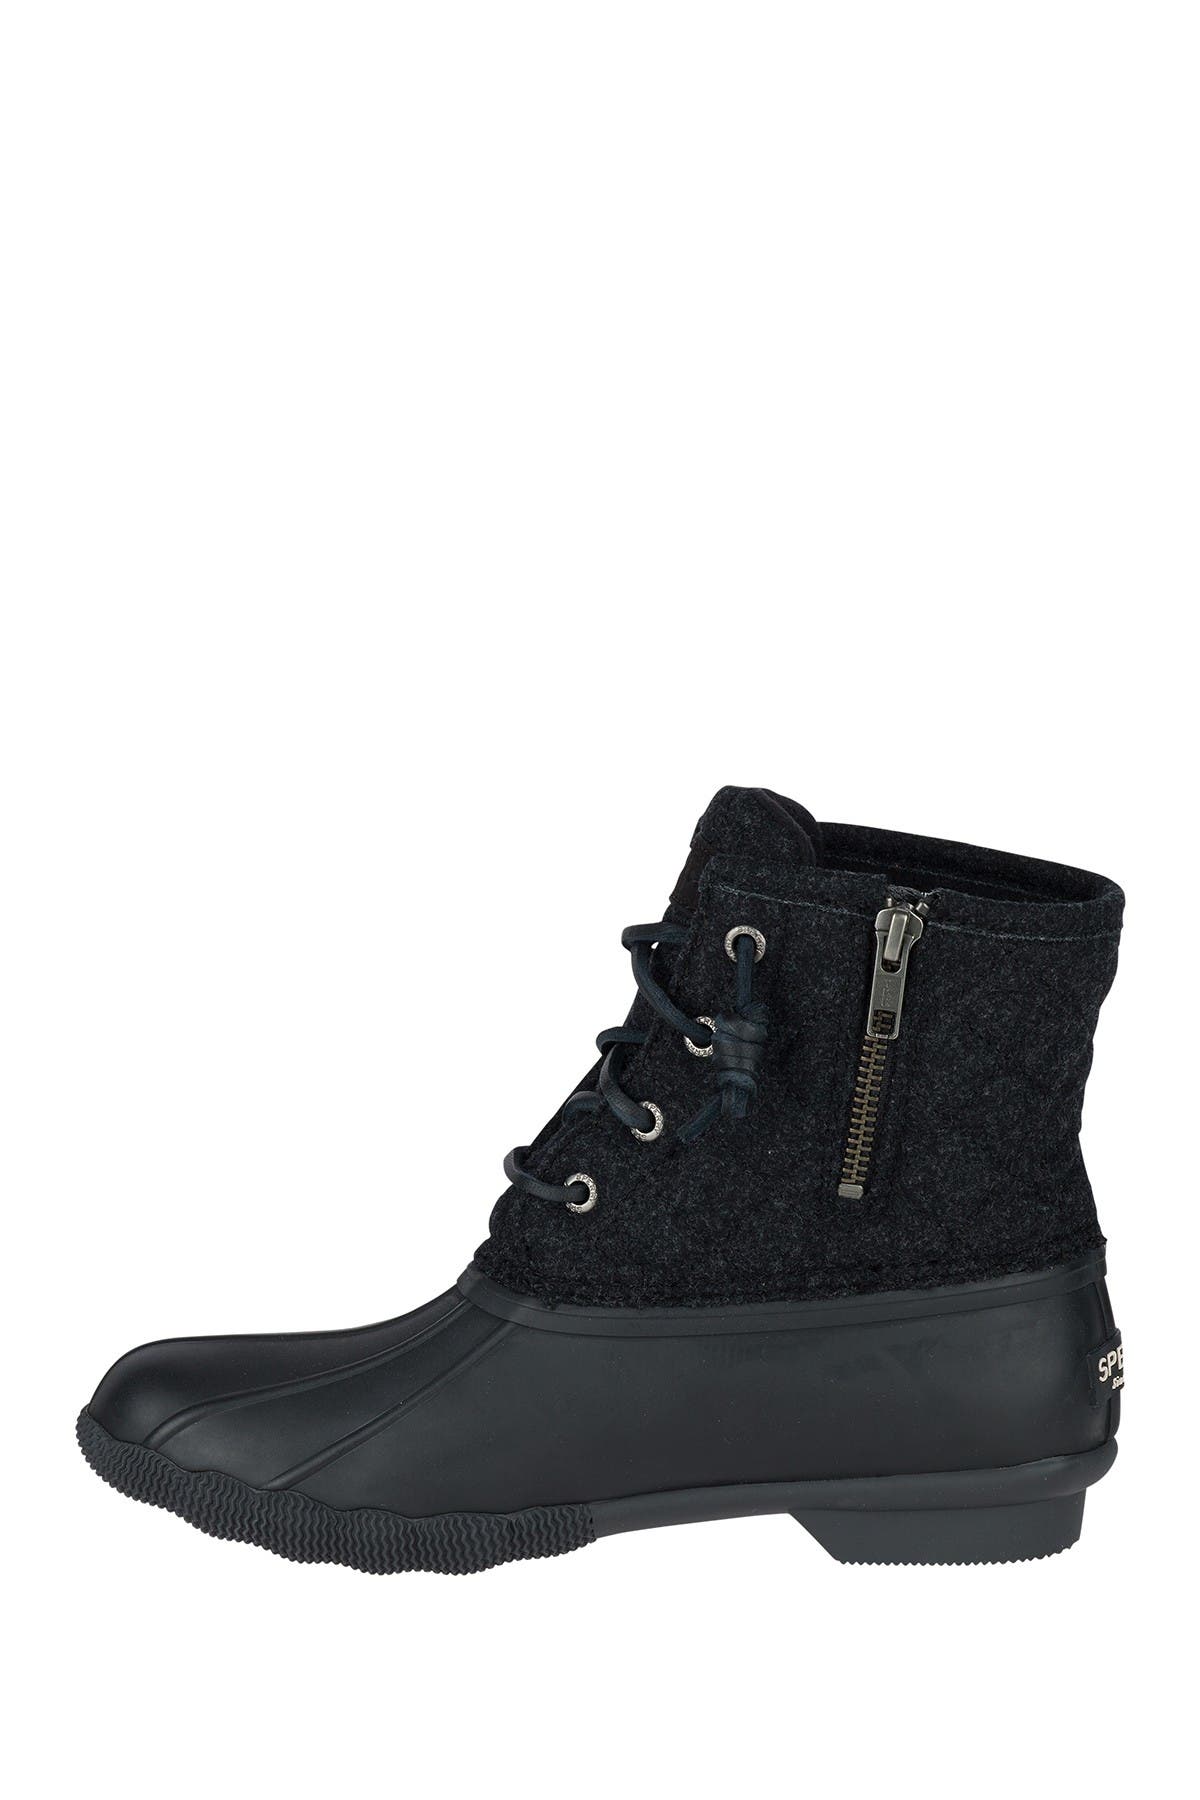 sperry quilted wool duck boot